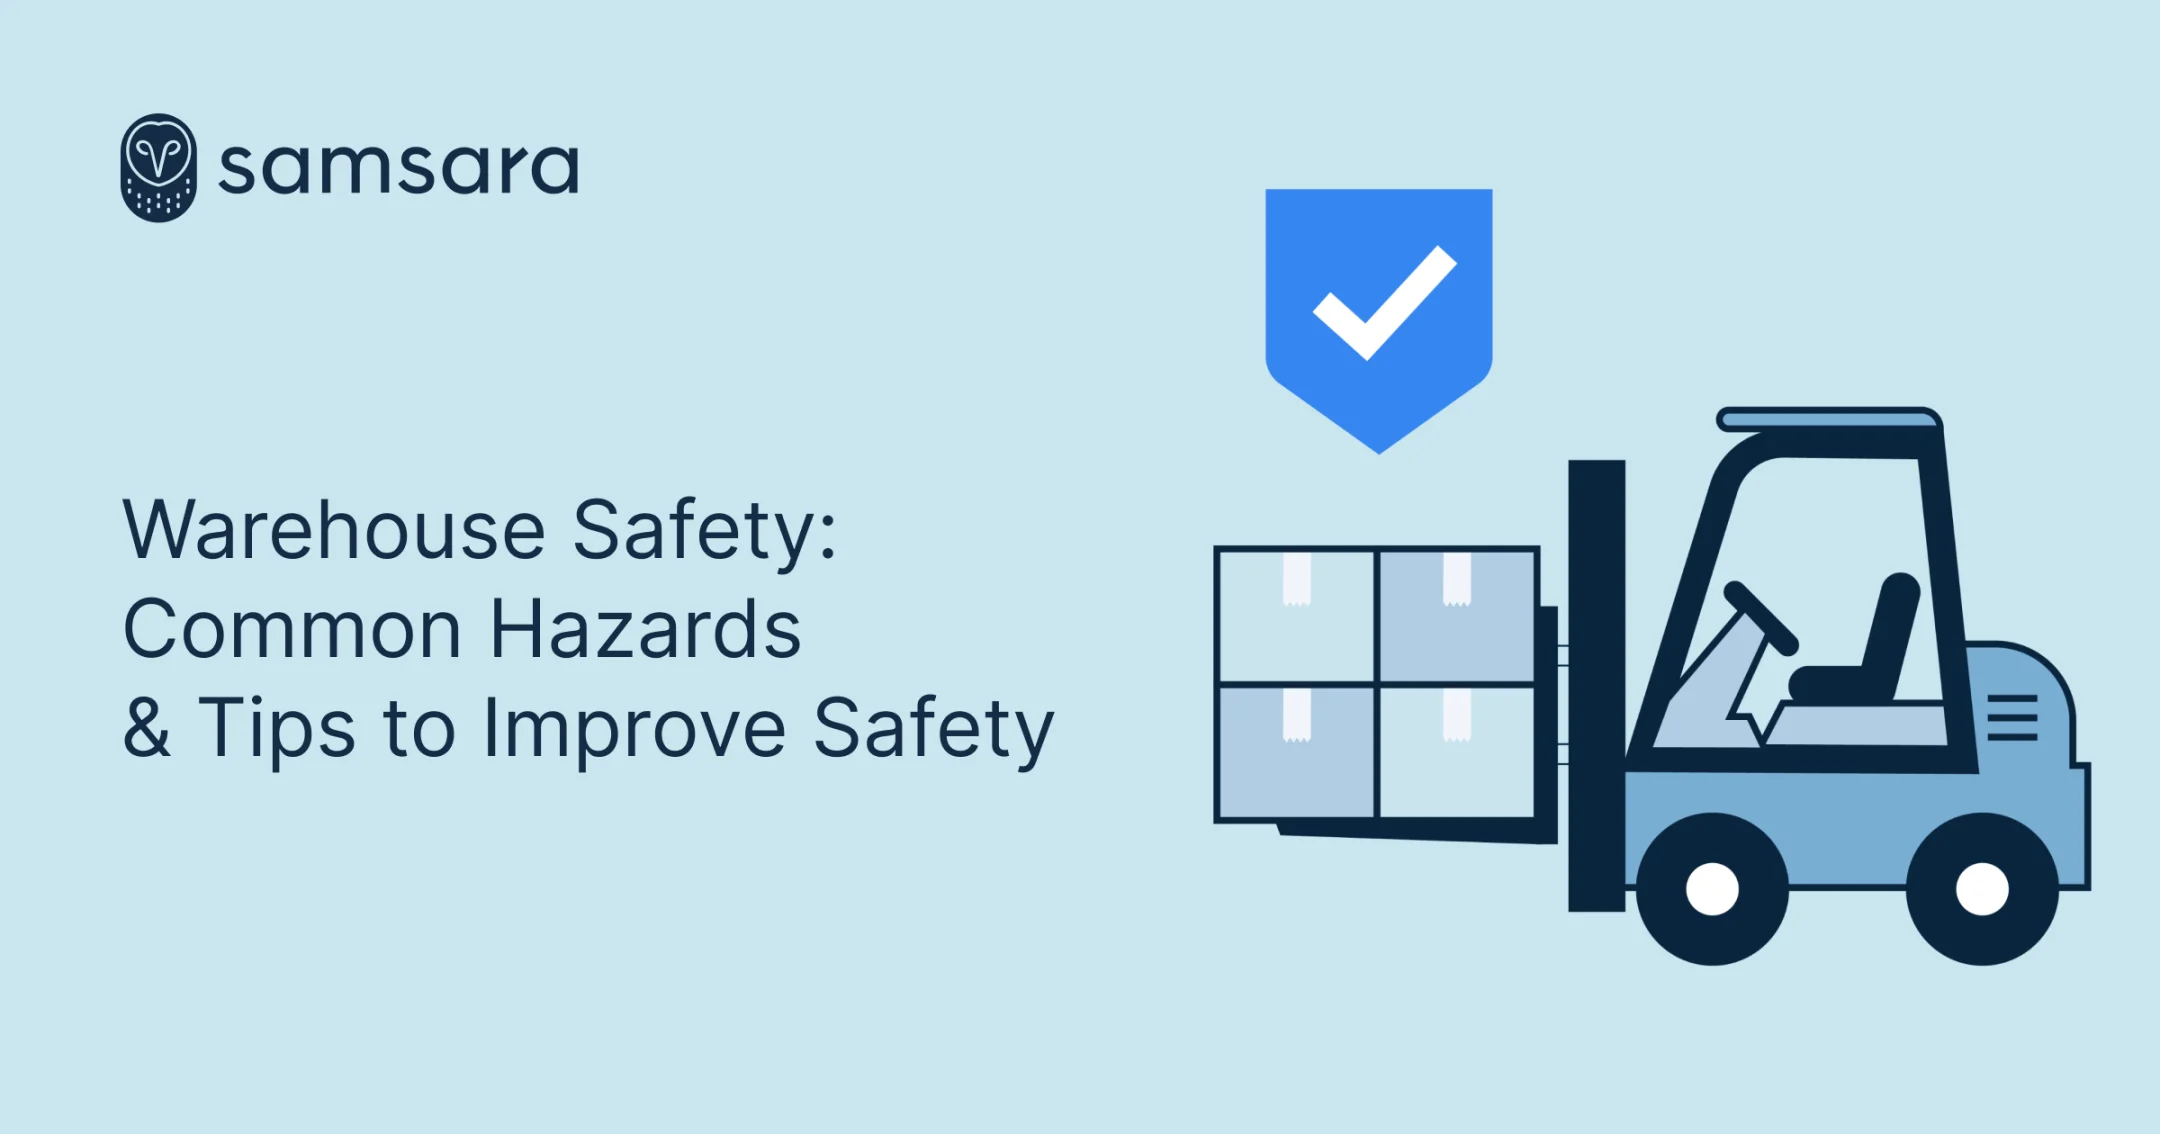 Warehouse Safety: Common Hazards & Tips to Improve Safety